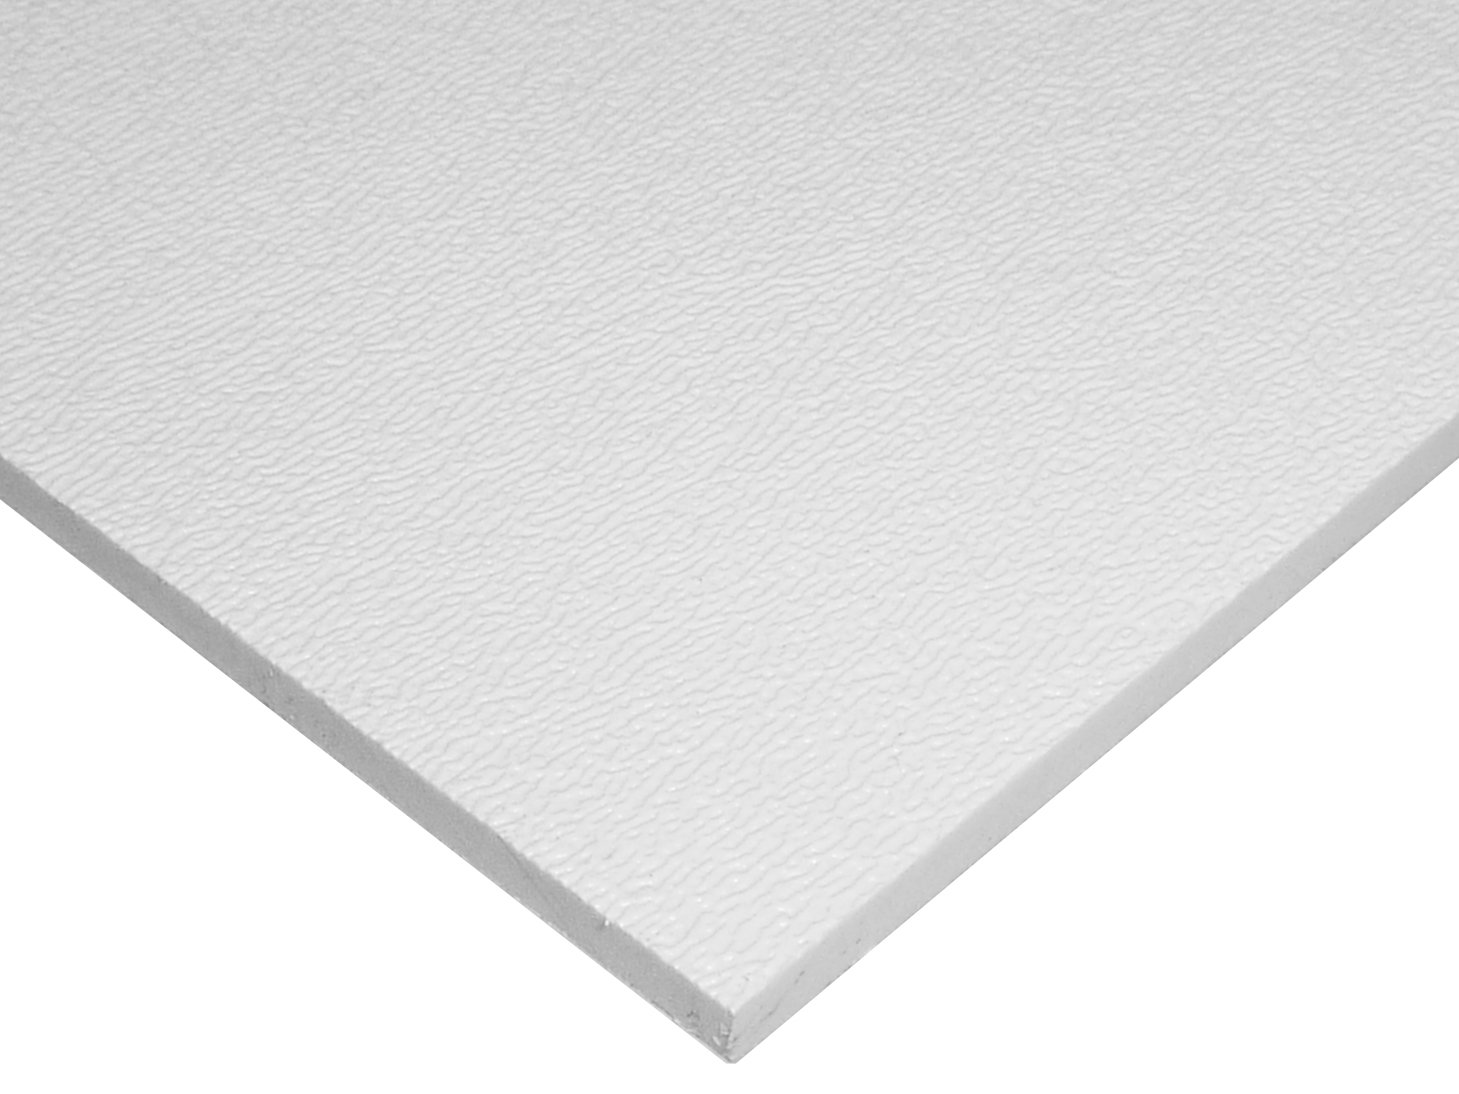 ABS Sheet | White Extruded